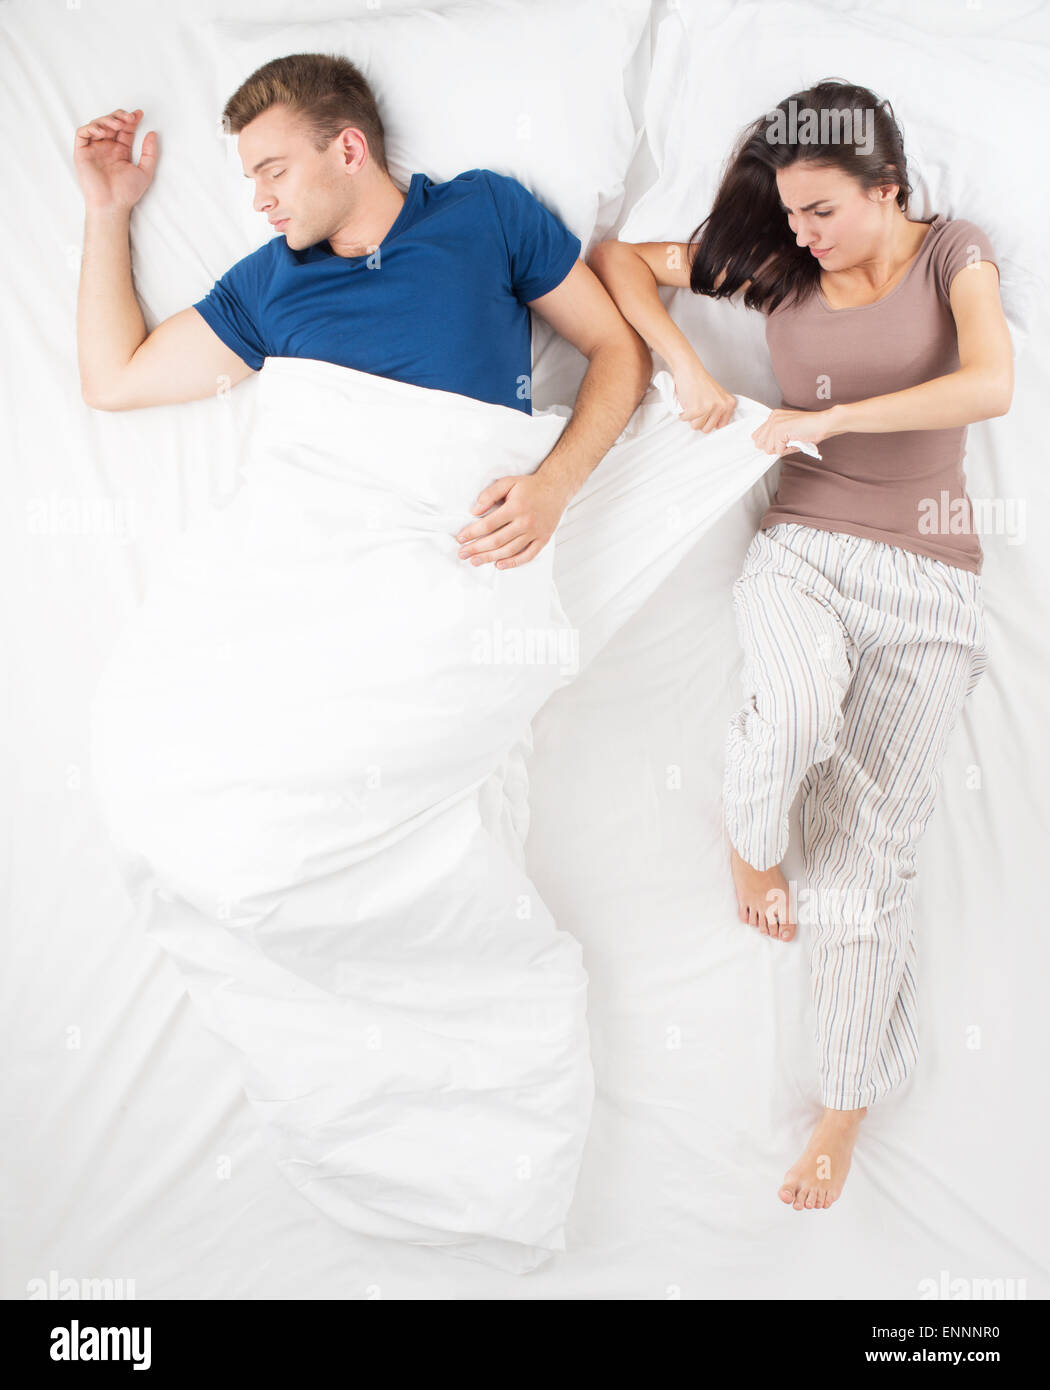 Young couple dividing a blanket while sleeping Stock Photo